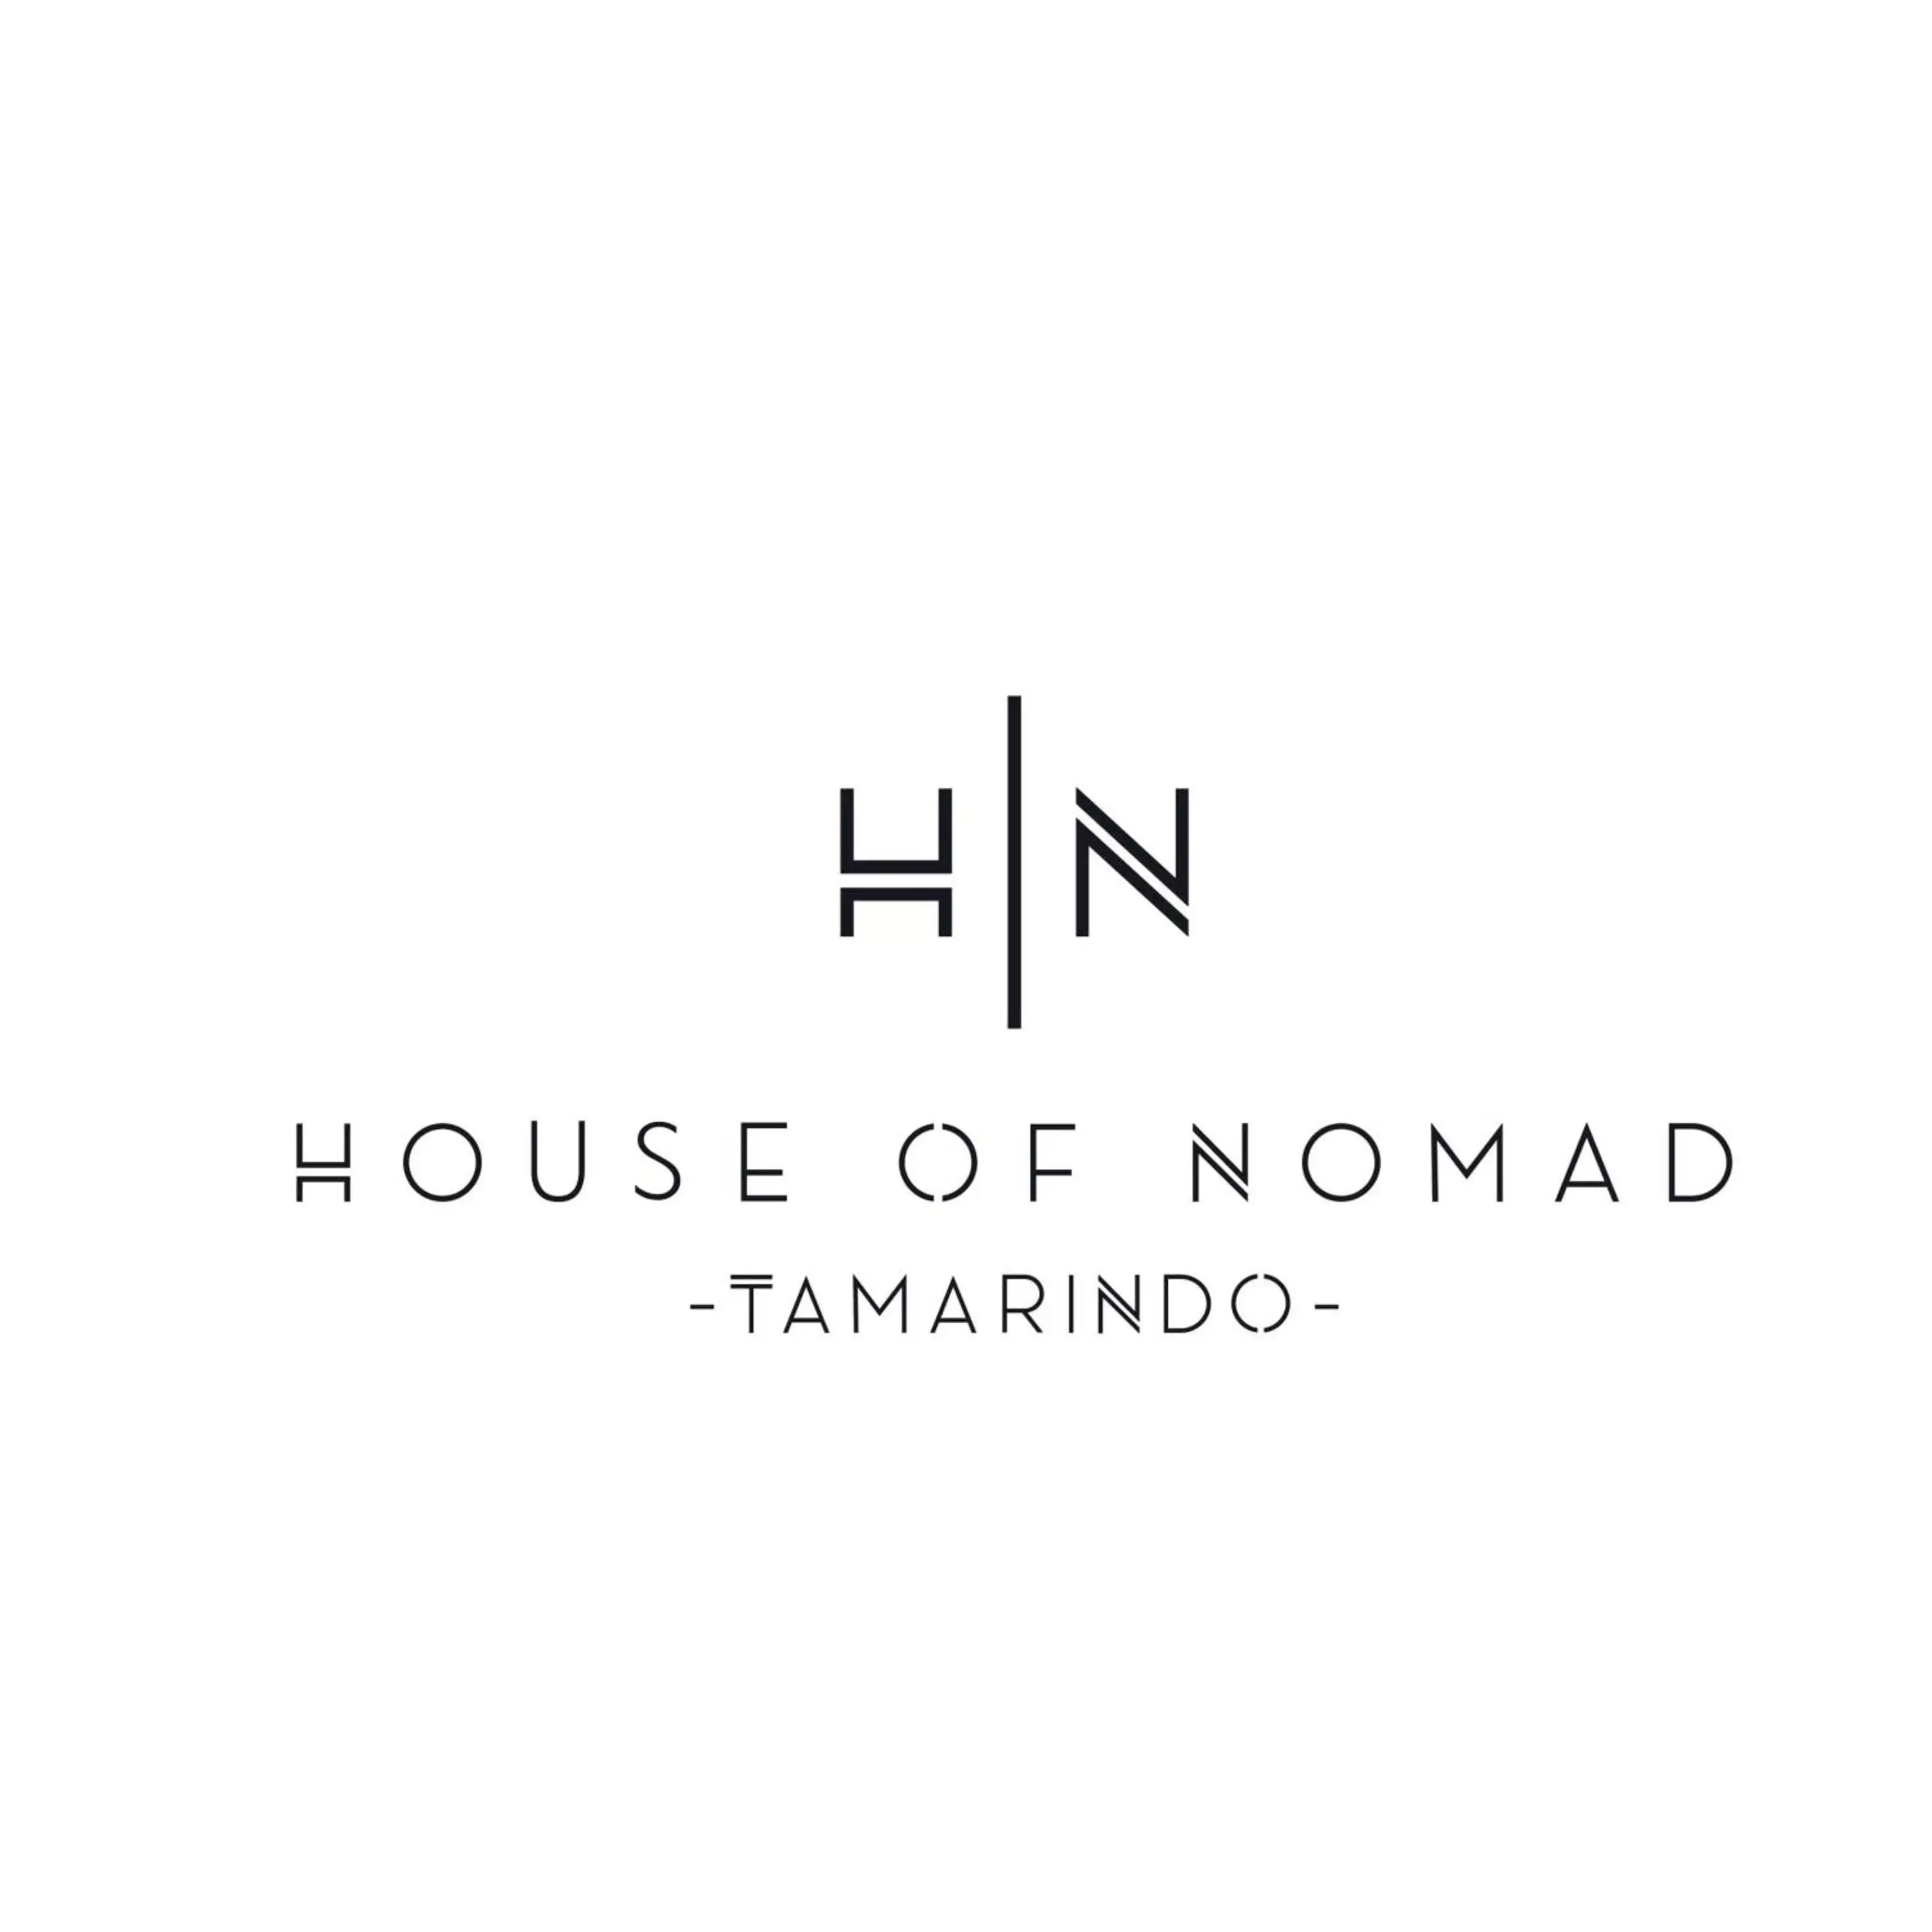 Logo/Certificate/Sign, Property Logo/Sign in House of Nomad - Adults only